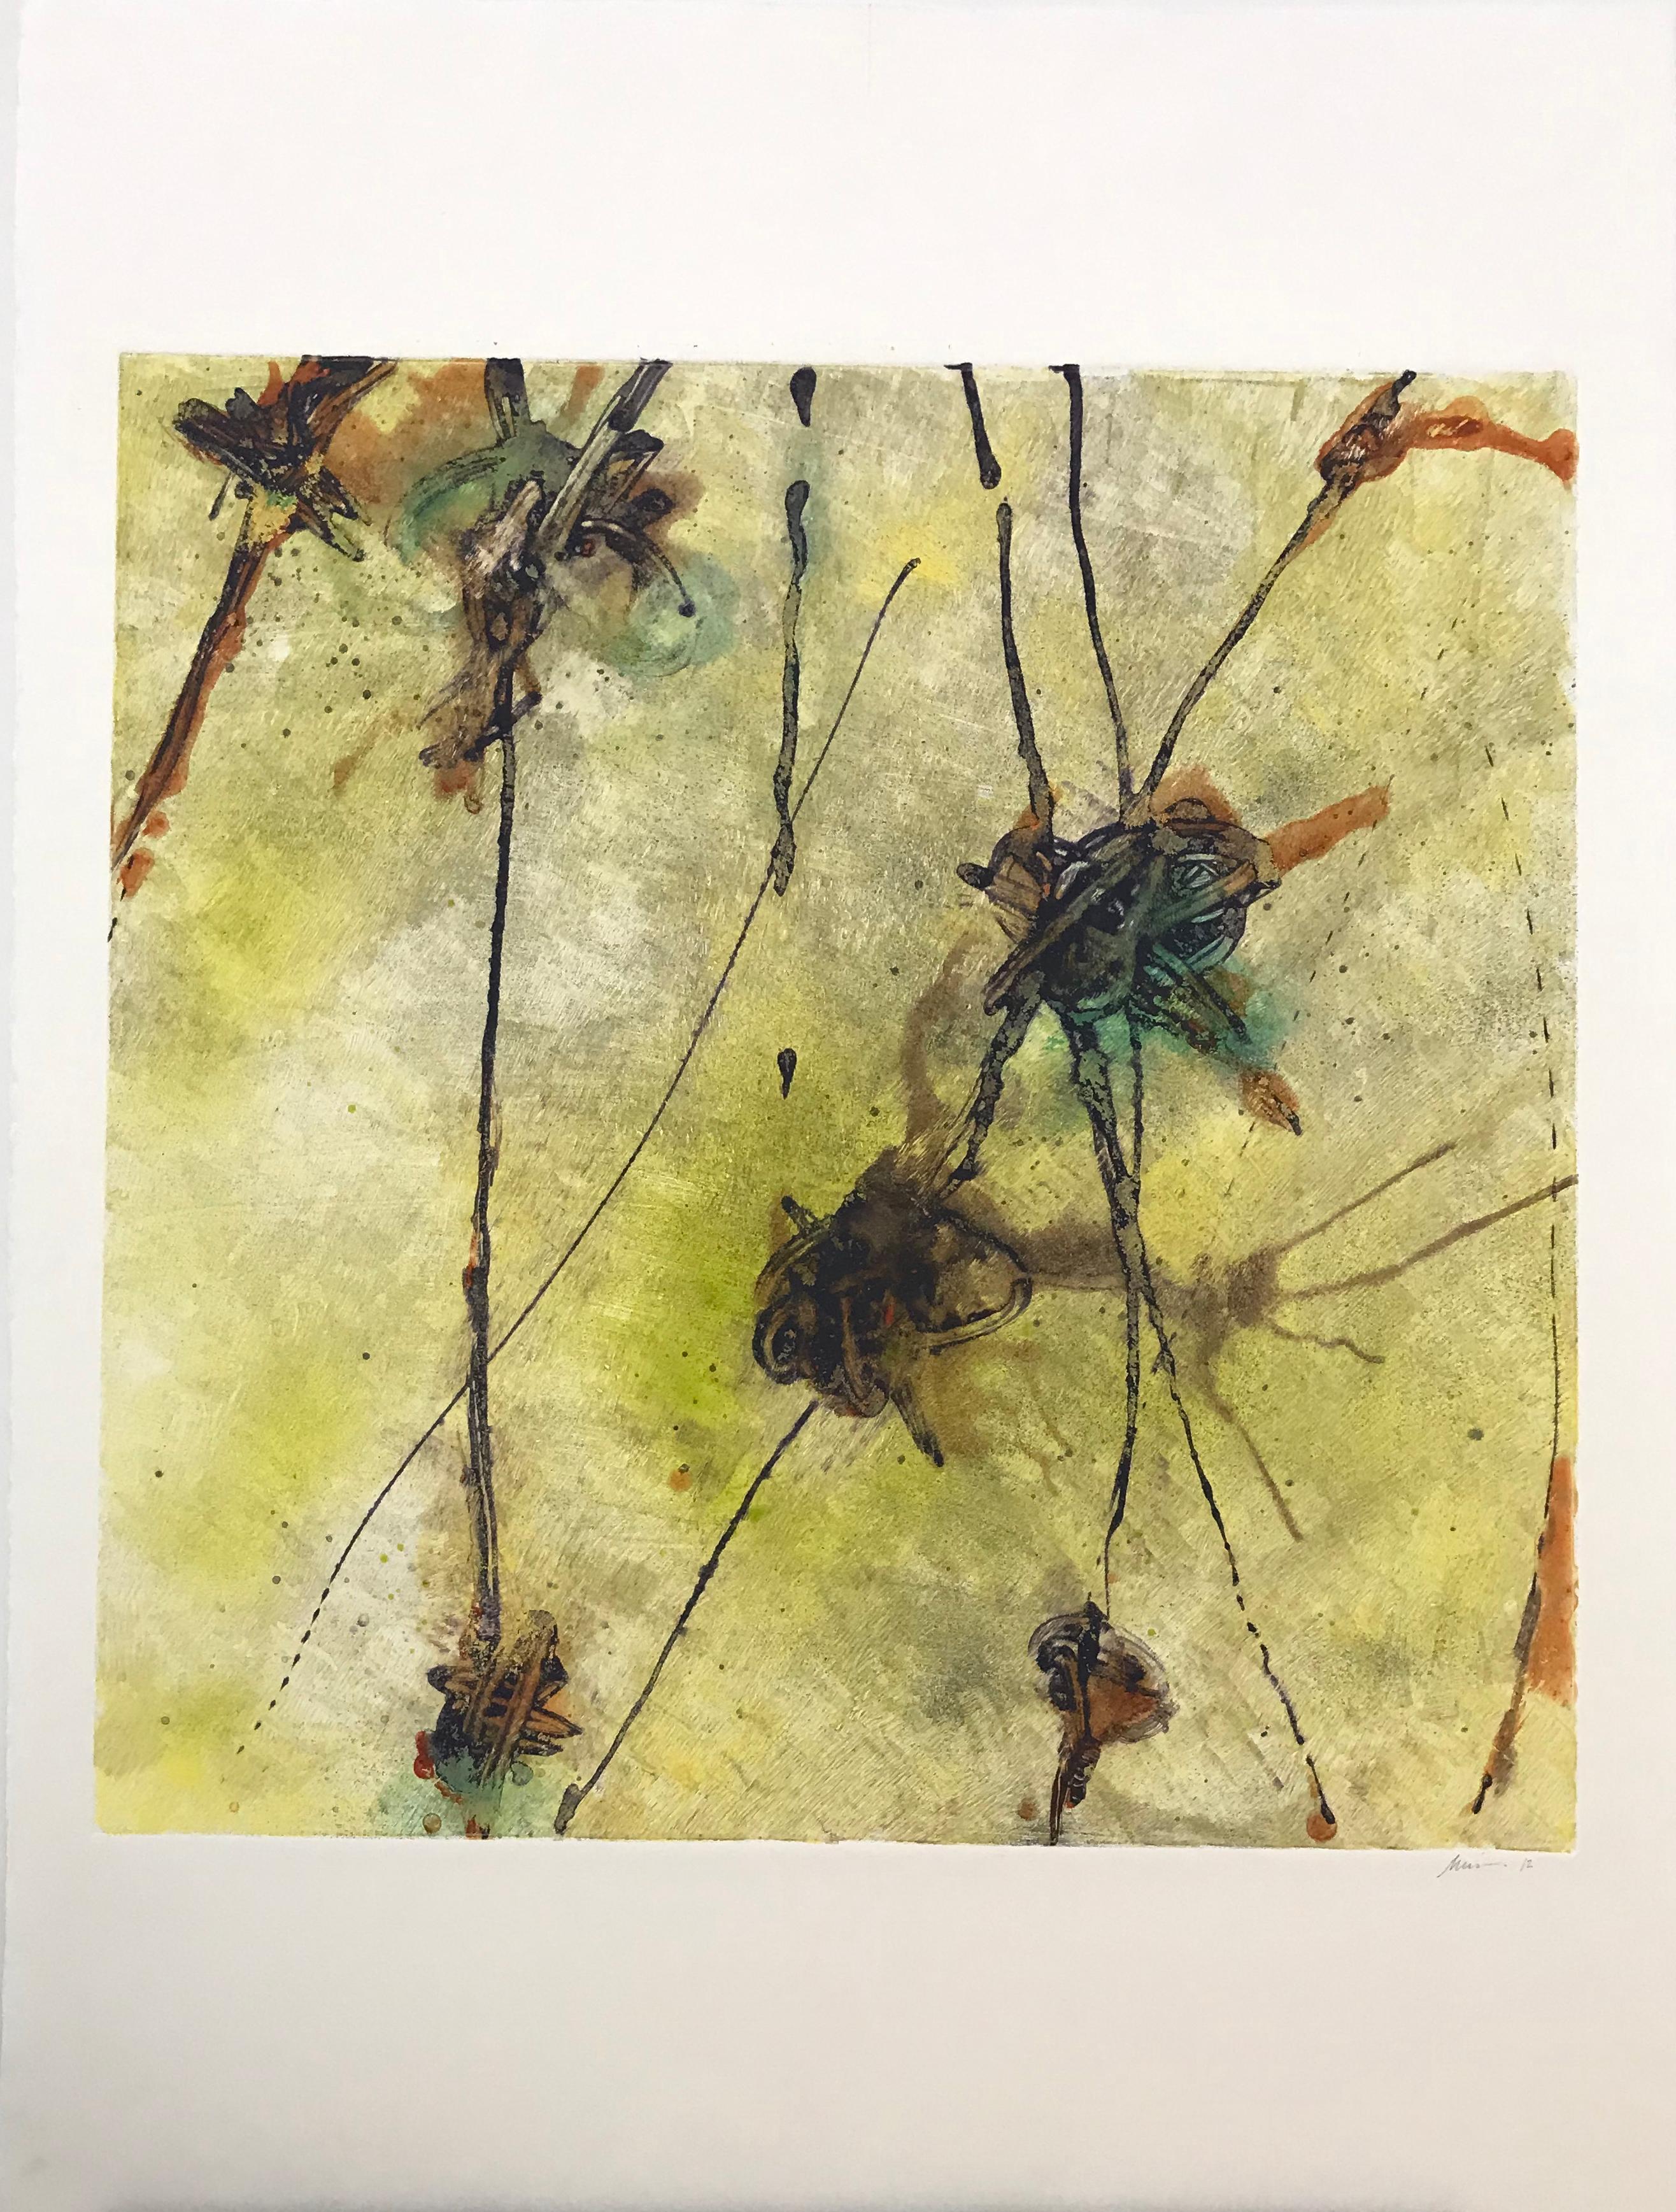  Knots in Green: Monotype on archival paper Size: 20 x 20 by South American/Venezuelan artist Luisa Duarte is an example of geometric abstract art . Luisa Duarte works out of her studio in Houston, Texas.  Price is unframed. Price for frame can be